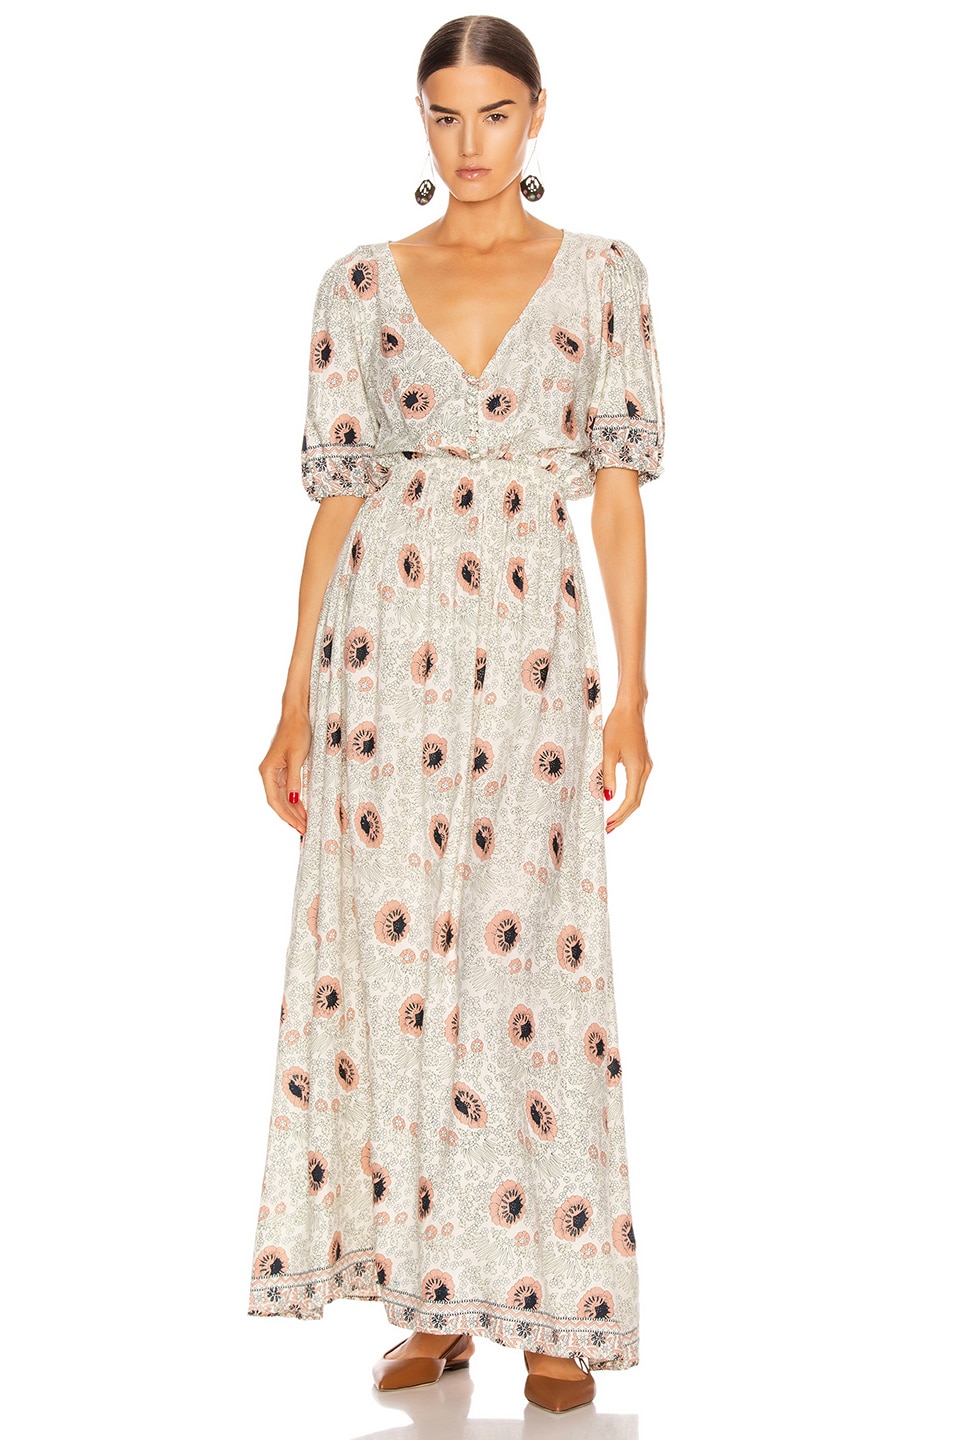 Image 1 of Natalie Martin Laurie Dress in Vintage Flowers Apricot